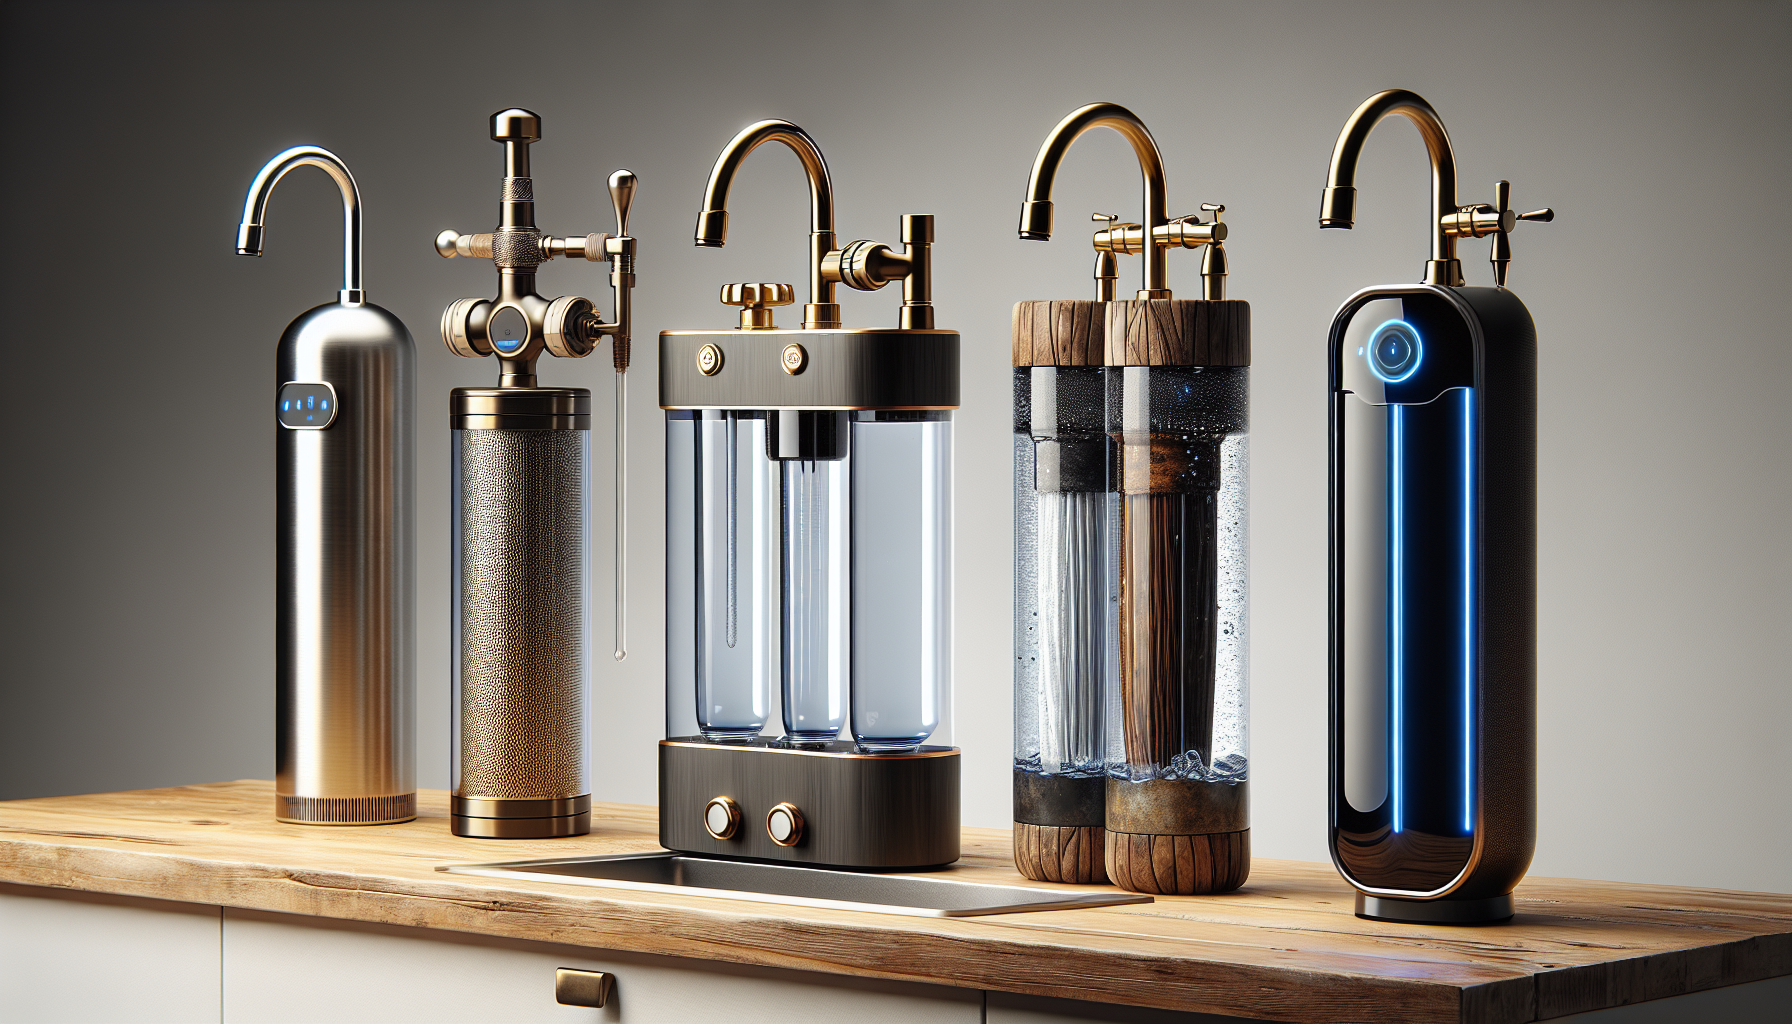 Variety of water filter designs for kitchen taps